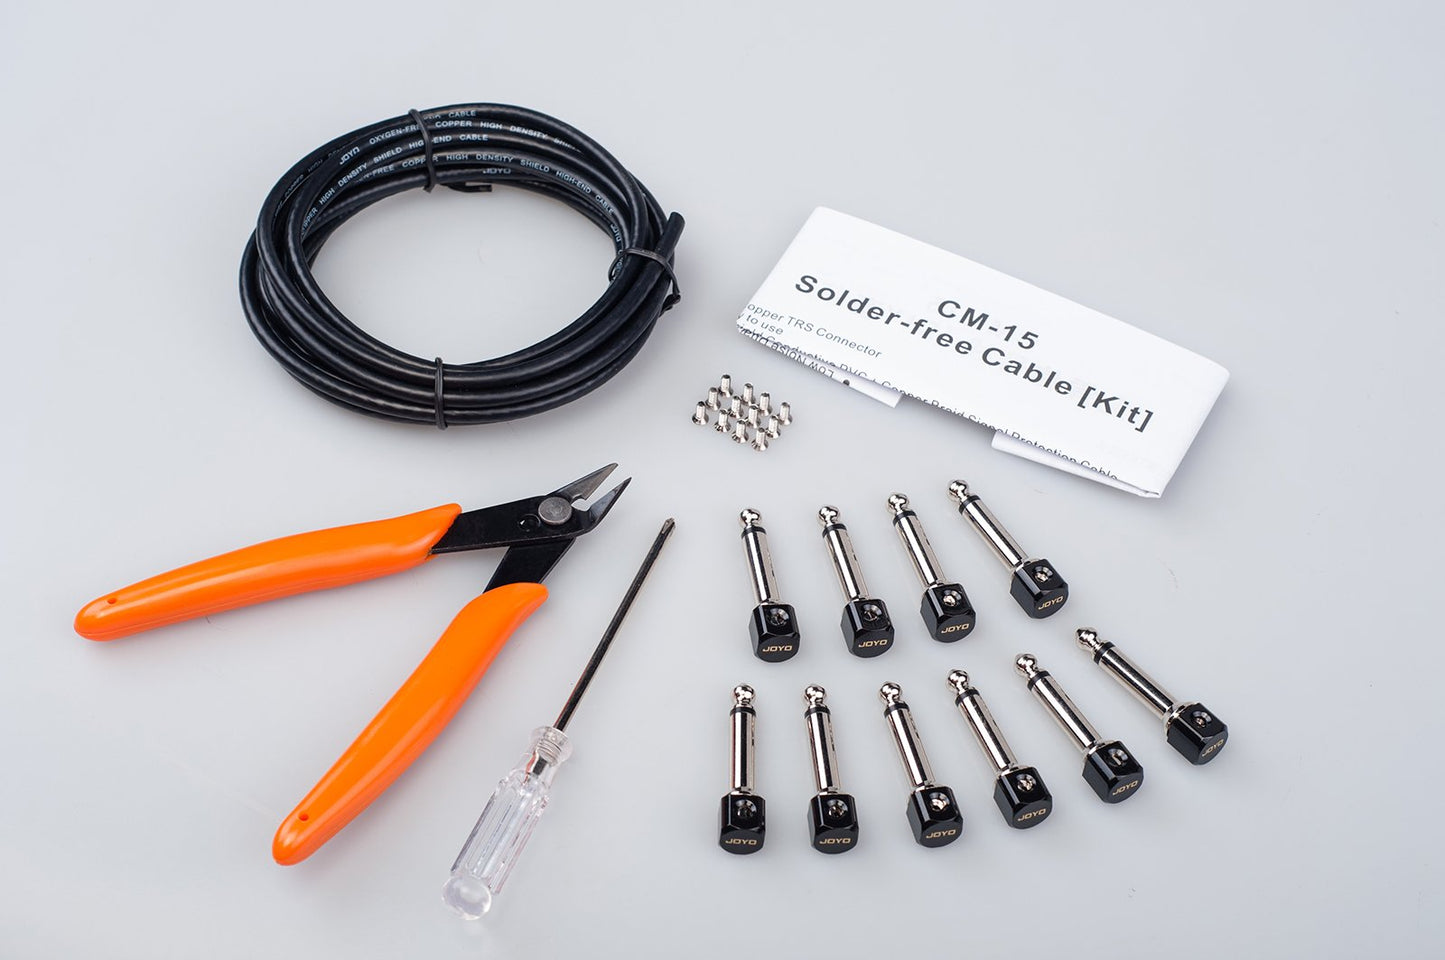 CM-15 SOLDERLESS CABLE